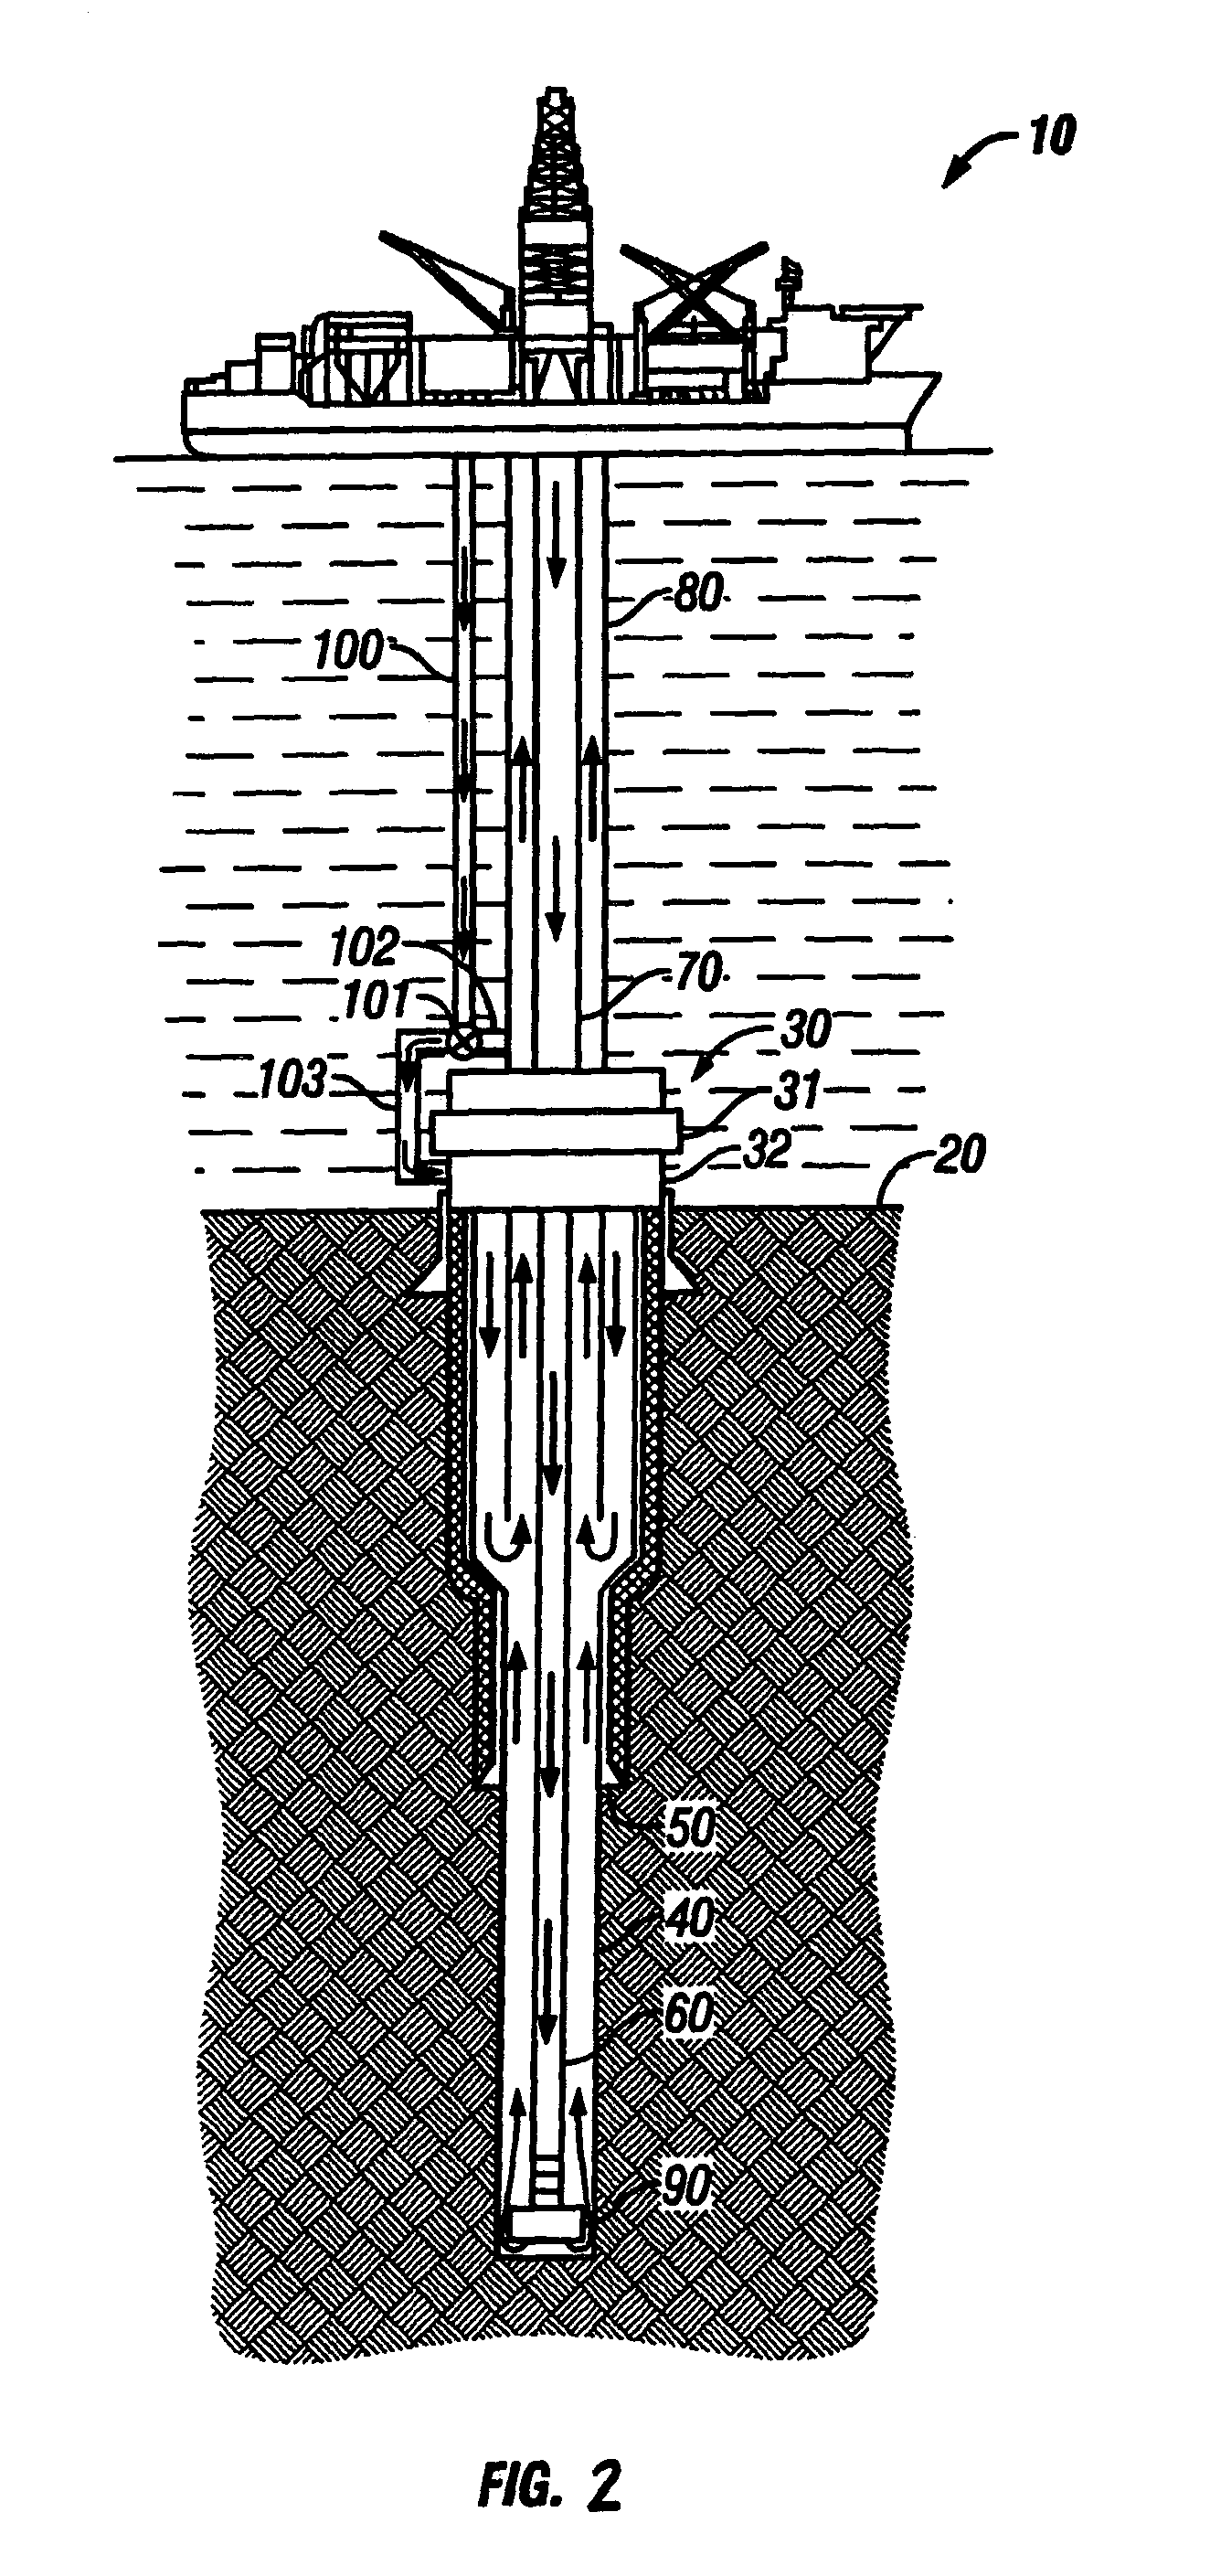 System for drilling oil and gas wells by varying the density of drilling fluids to achieve near-balanced, underbalanced, or overbalanced drilling conditions